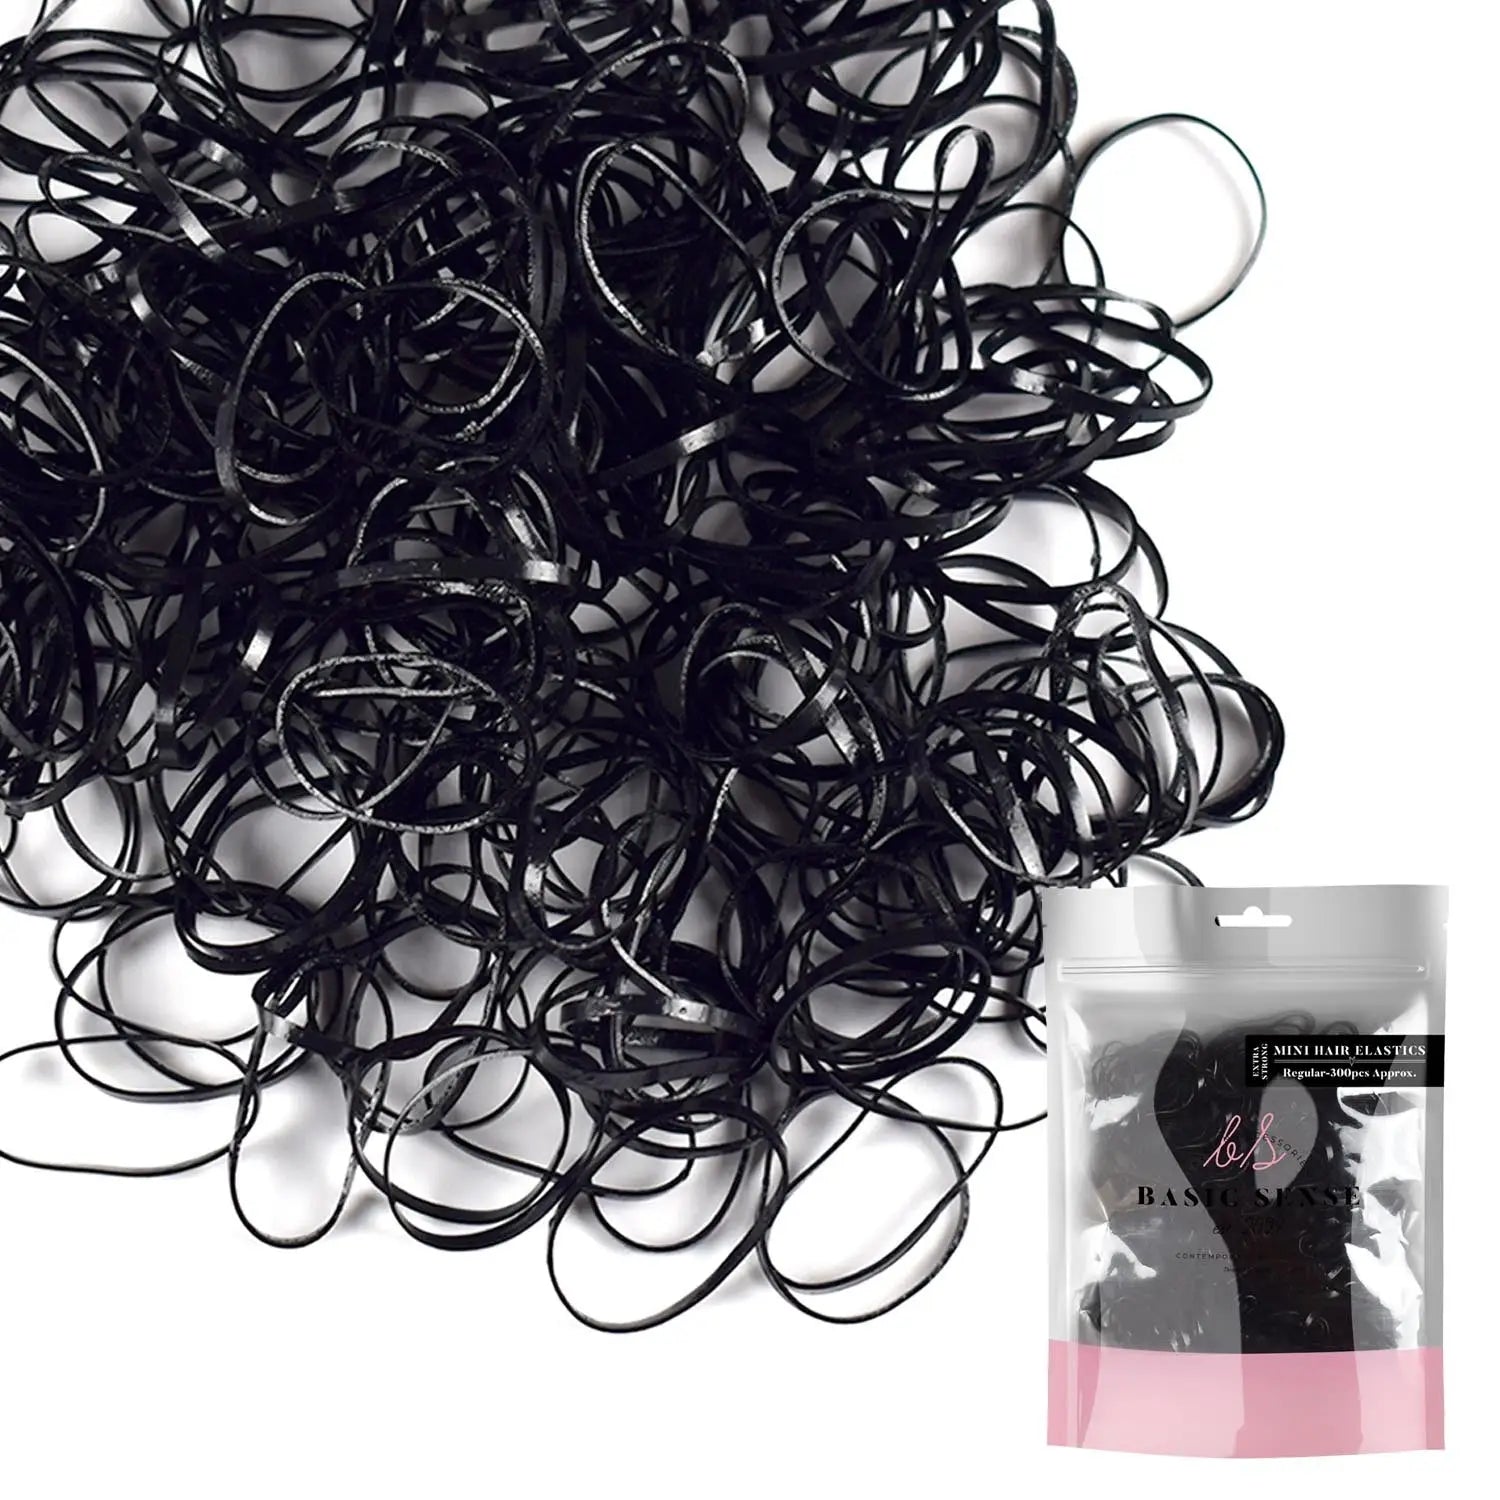 ’Extra strong mini rubber bands for versatile hair styling options’